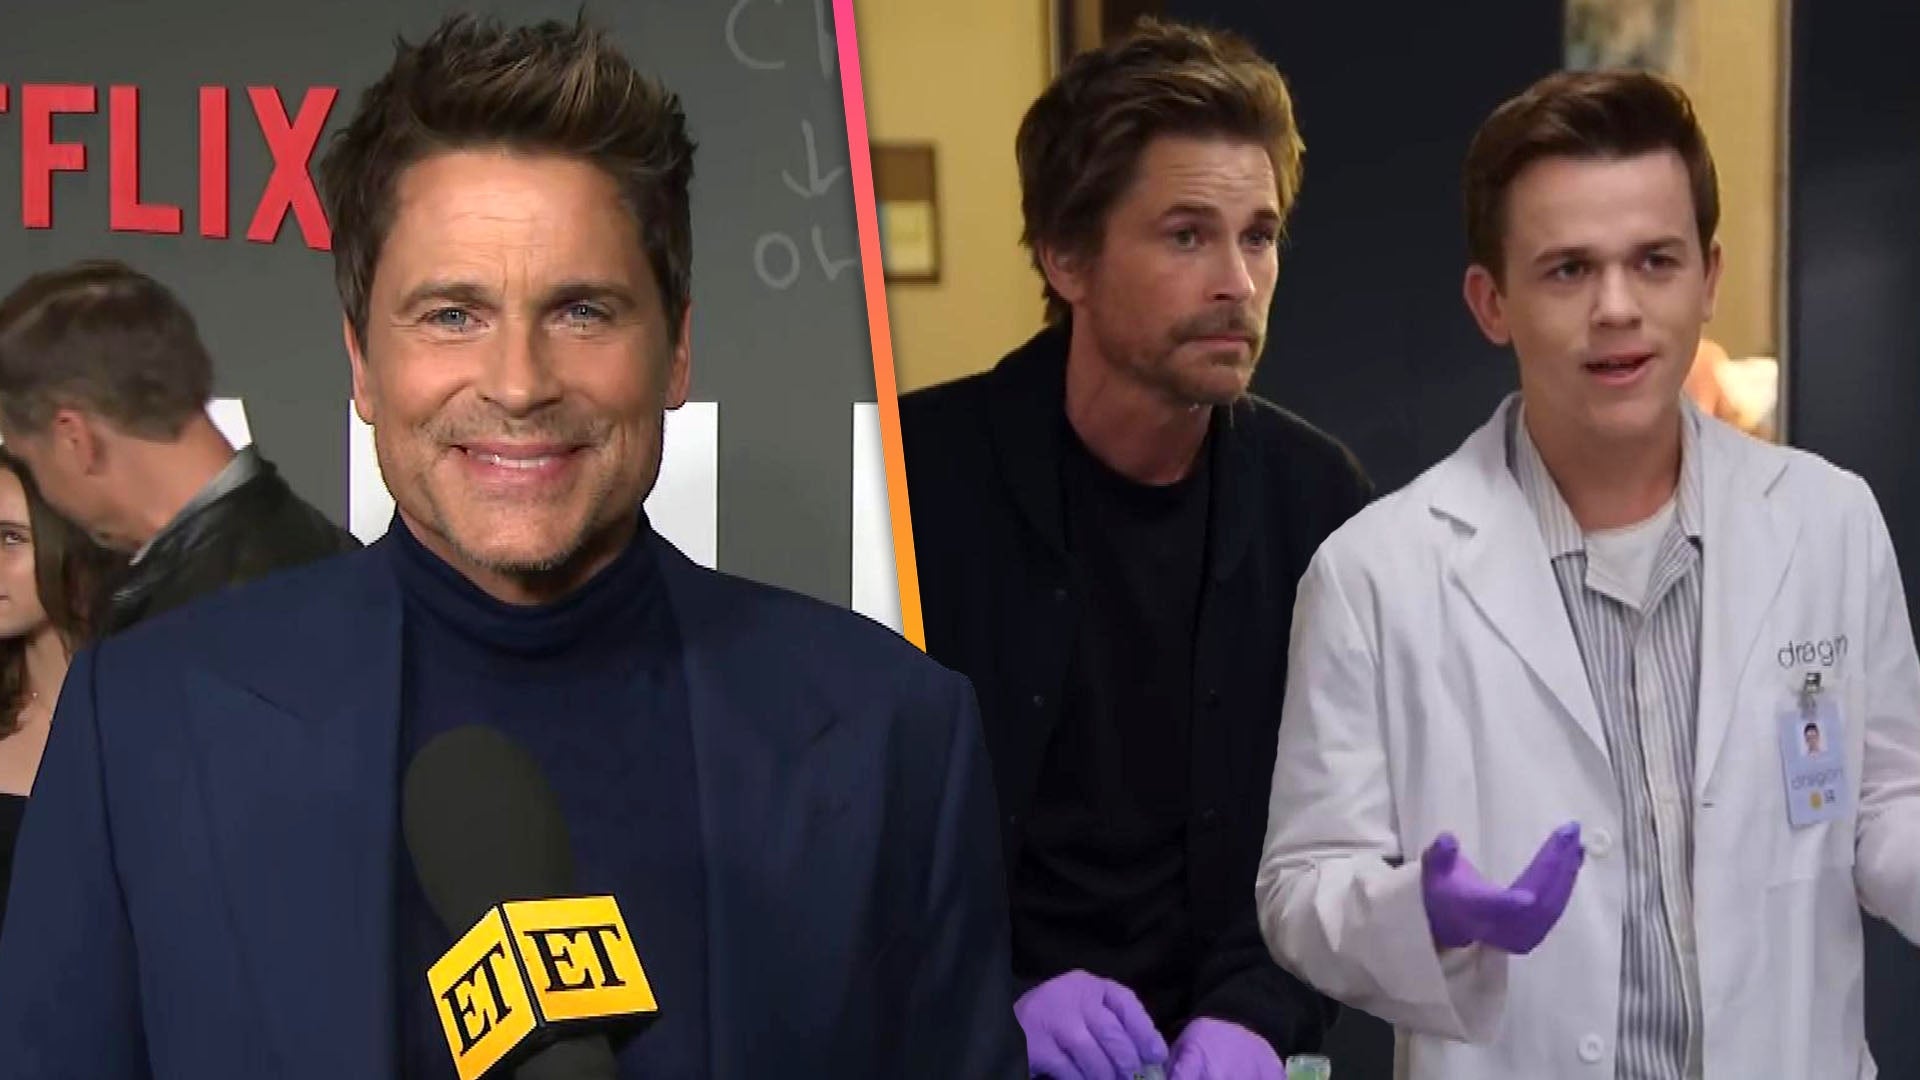 How Rob Lowe Feels About Working With His Son and Having the ‘Best of Both Worlds’ (Exclusive)